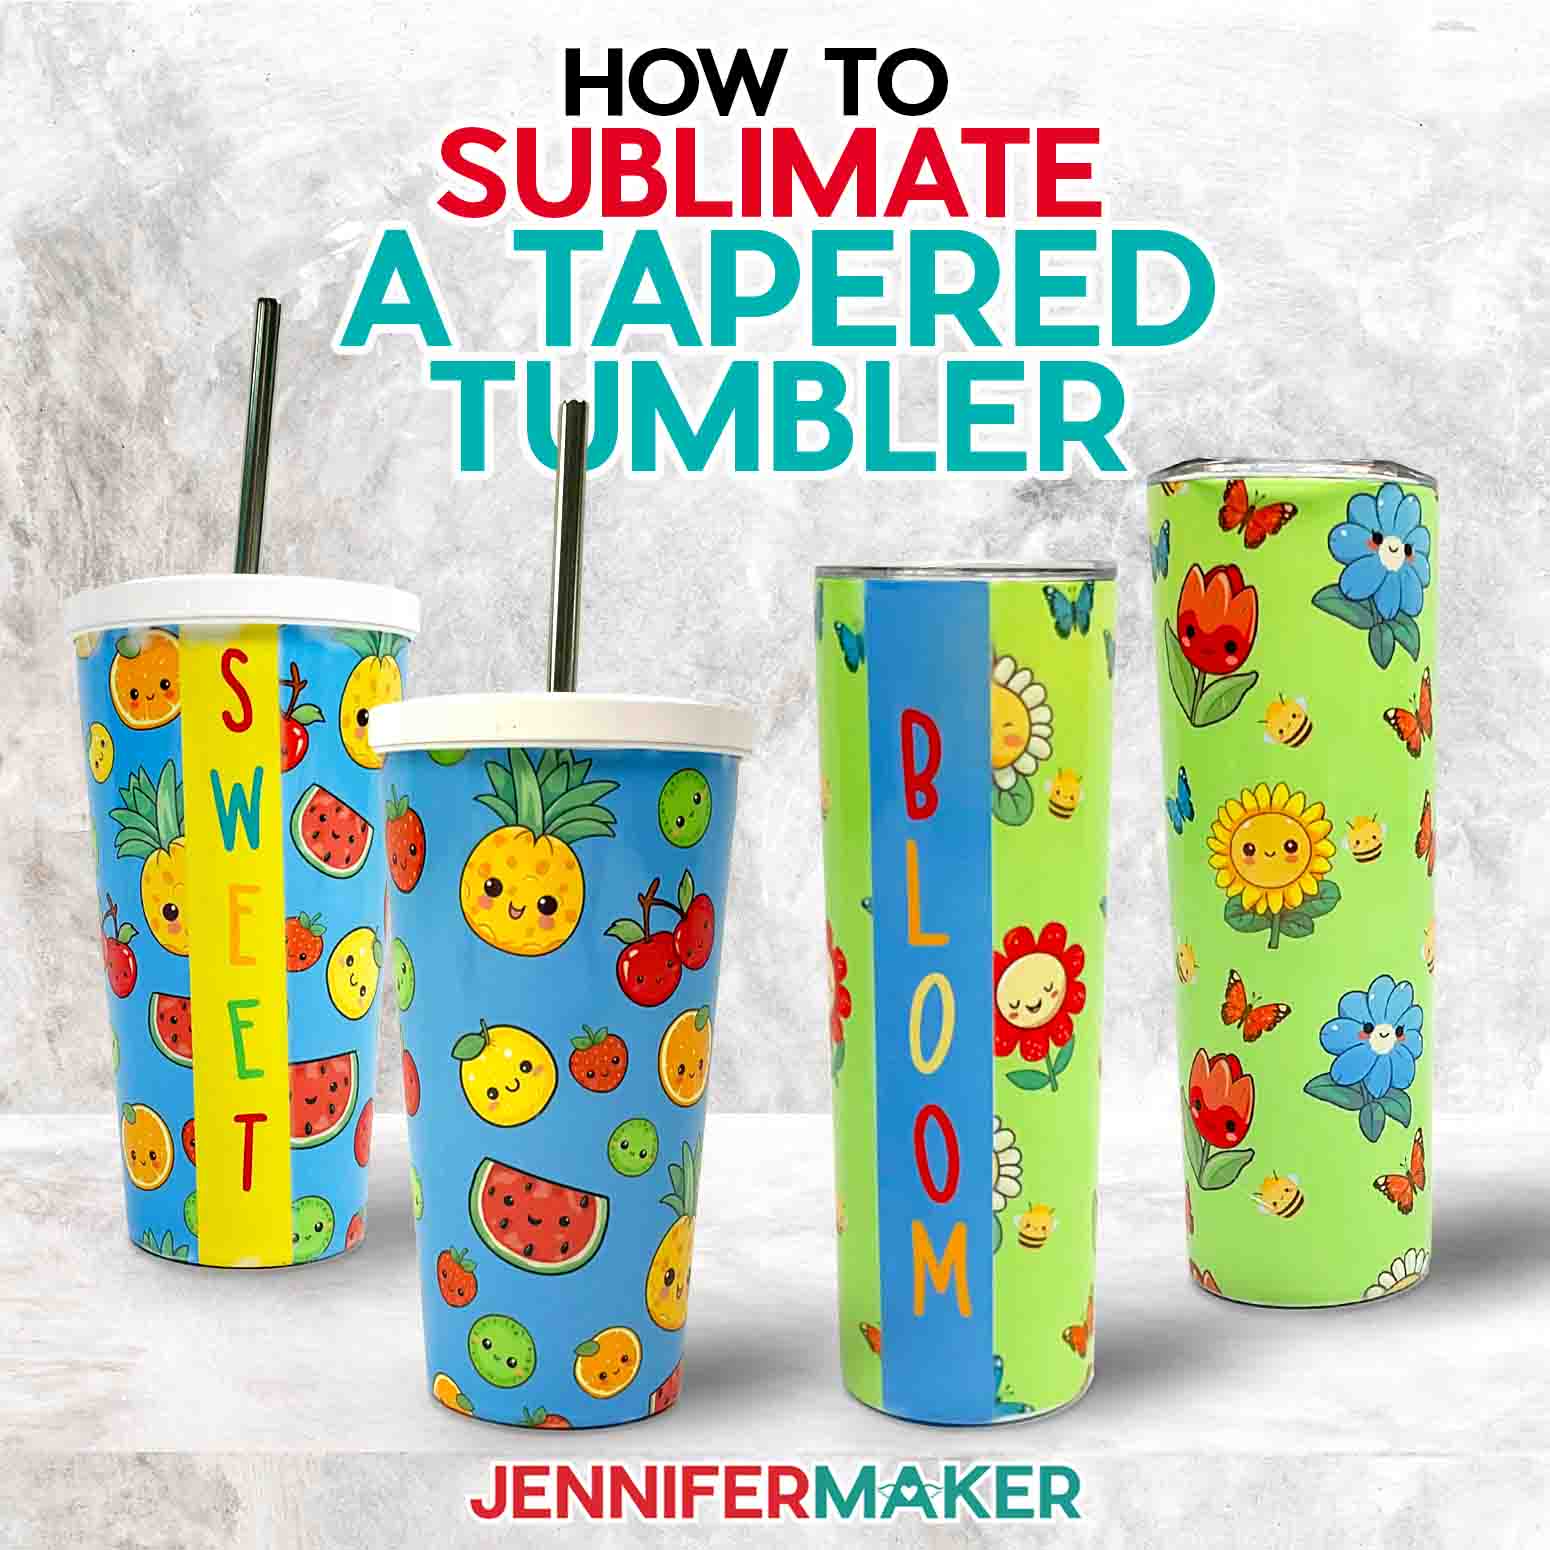 How to Sublimate Tapered Tumblers & Make a Wrap Template